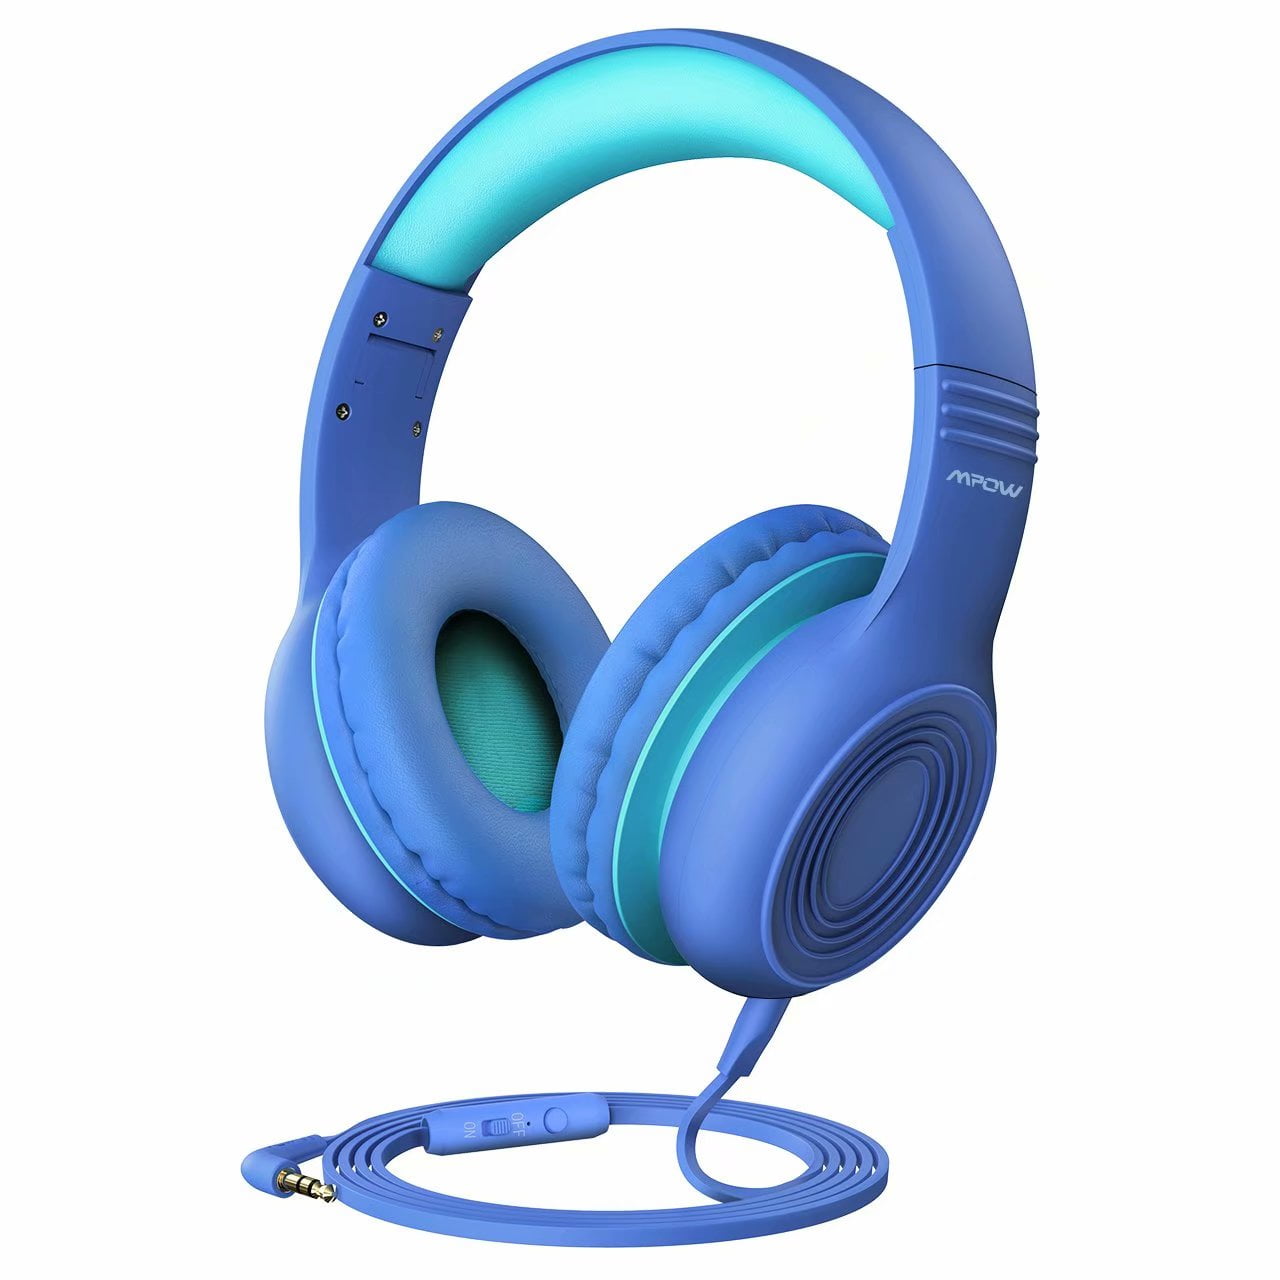 Adjustable and Flexible for Kids Wired Headphones with Safe Volume Limiter 85dB Girls,Suit for School Classroom Students Teens Children Boys Kids Headphones Ear Headphones for Kids 